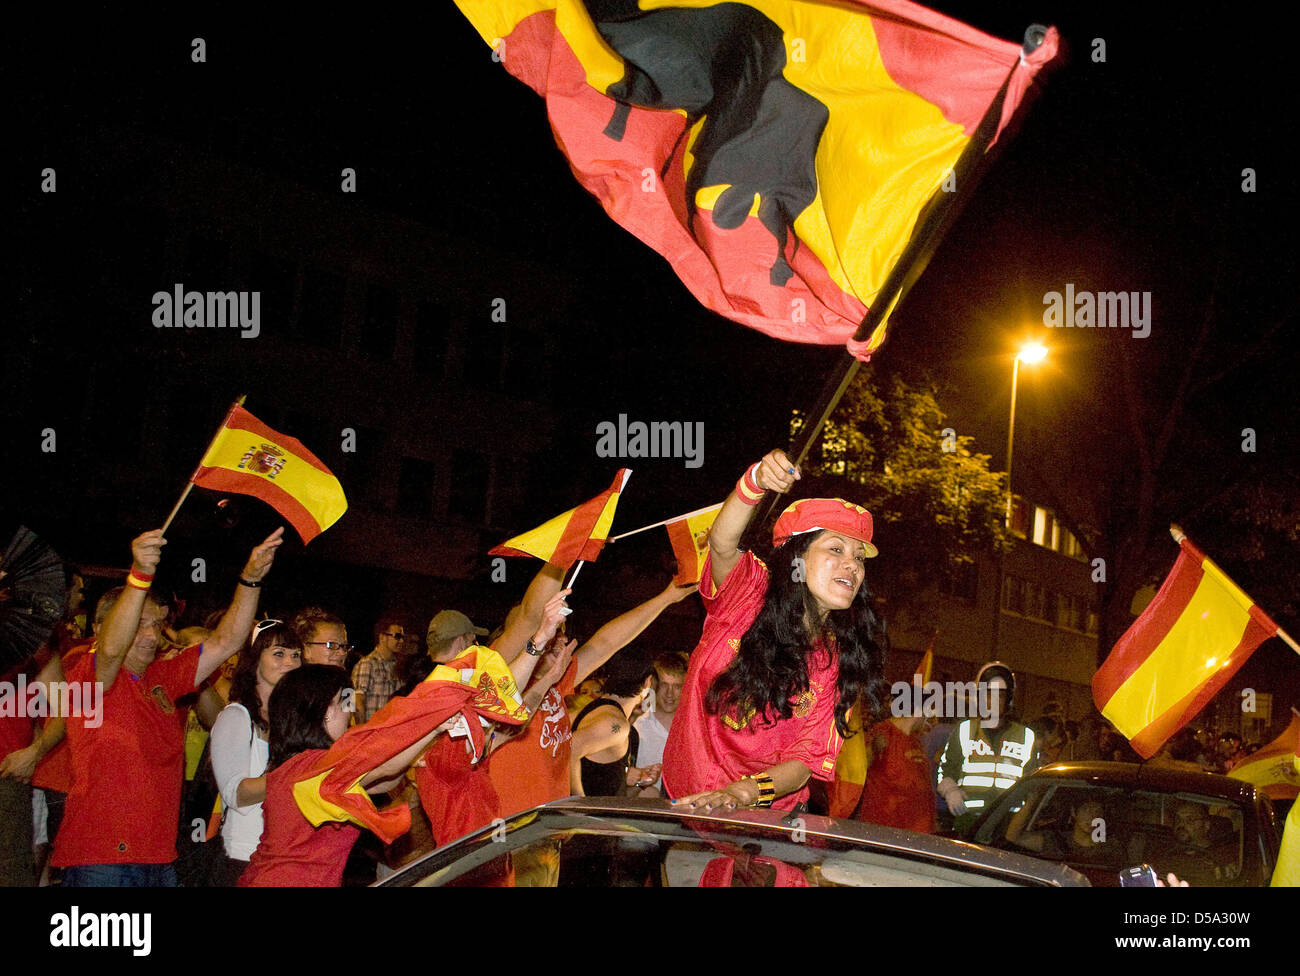 With flags, Spanish fans celebrate the victory of their team of the final match Spain vs. the Netherlands of the 19th FIFA World Cup 2010 on the streets of Hannover, Germany, 11 July 2010. Spain won against the Netherlands 1-0 and has is World Cup- holder for the first time ever. Photo: Michael Löwa Stock Photo